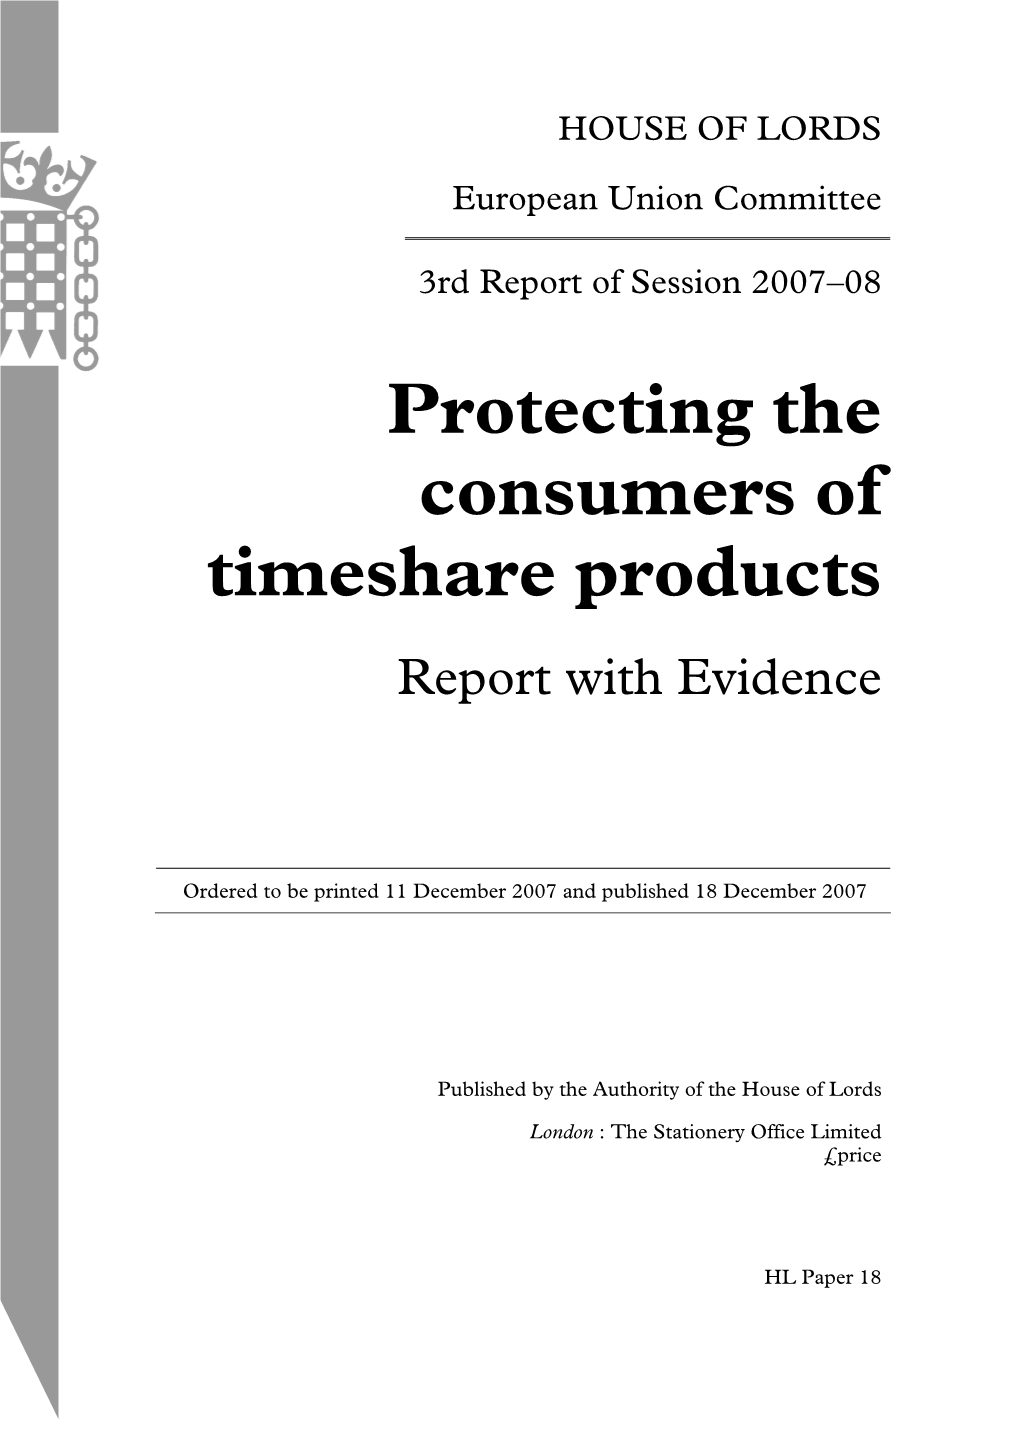 Protecting the Consumers of Timeshare Products